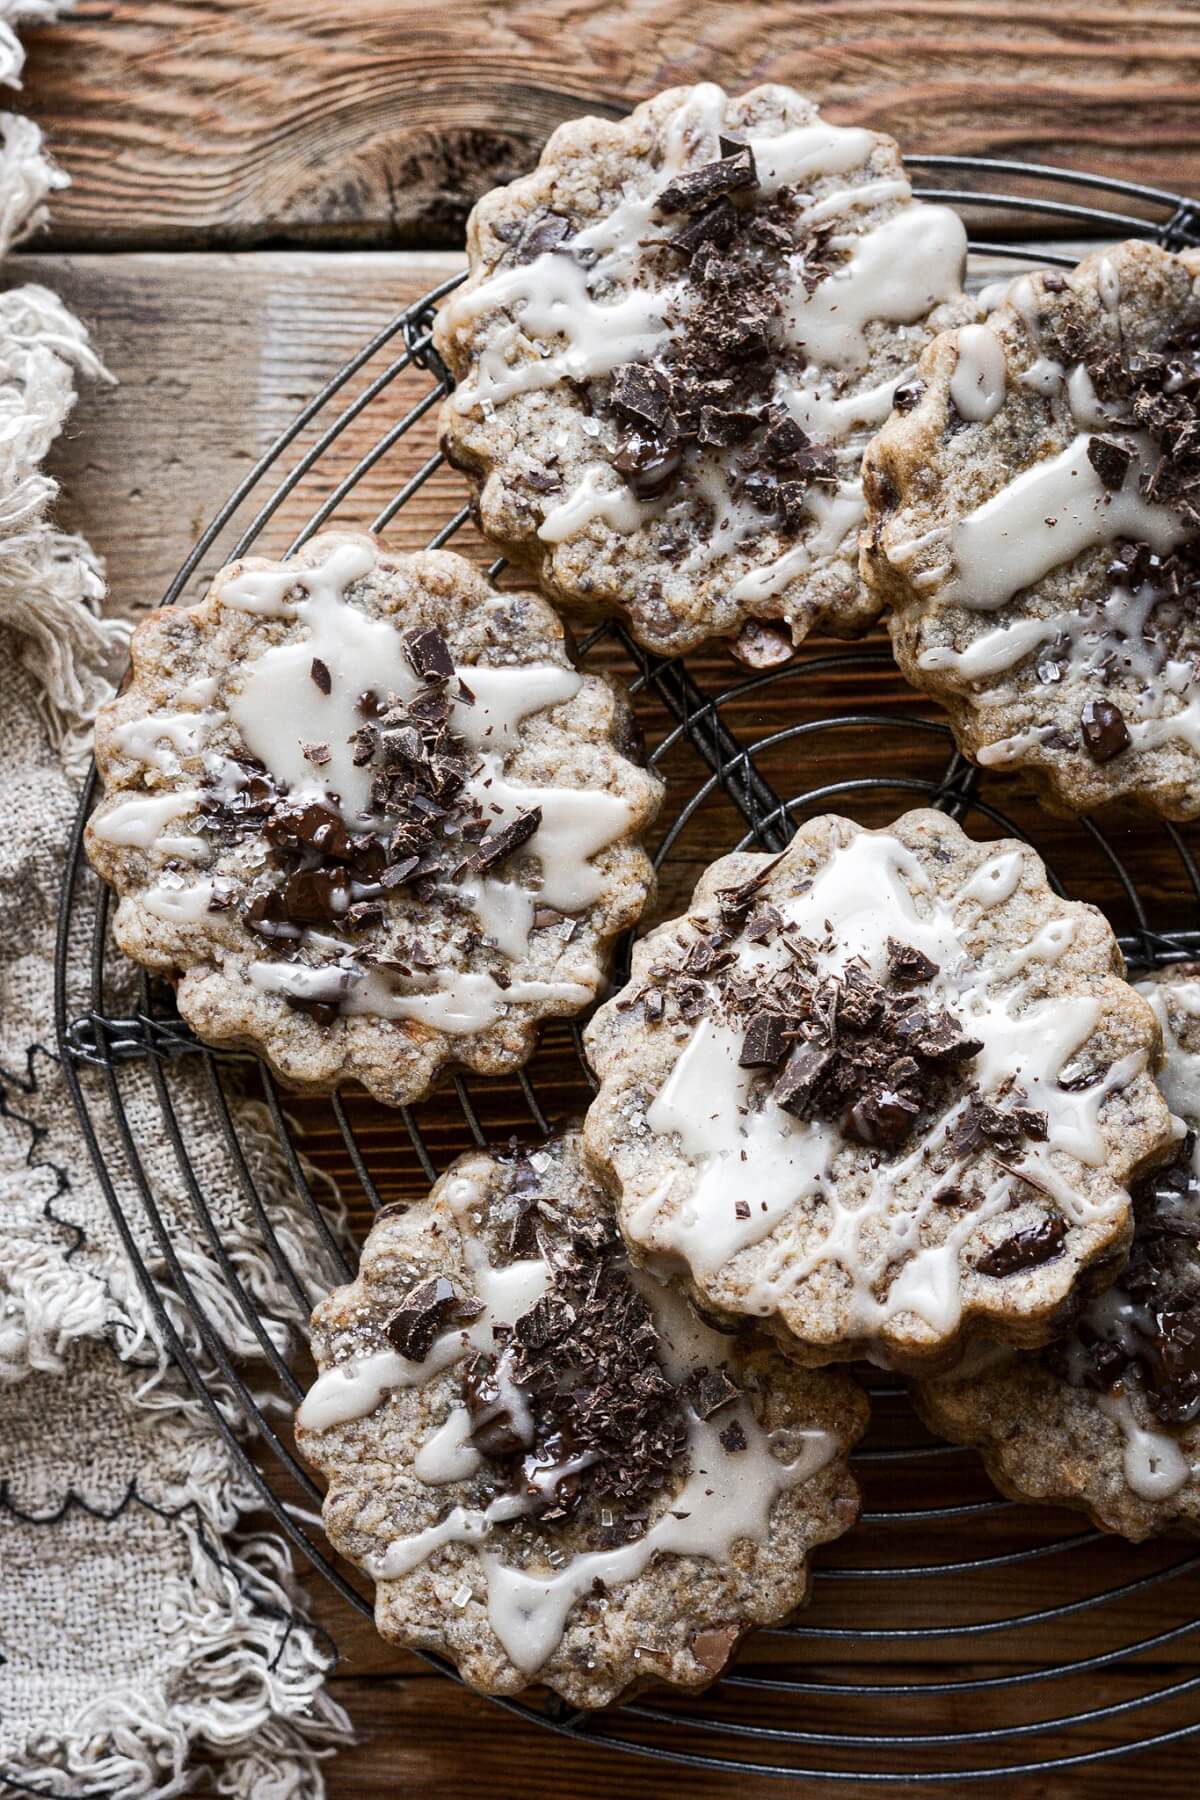 Chocolate chunk shortbread cookies with vanilla icing and chopped chocolate.